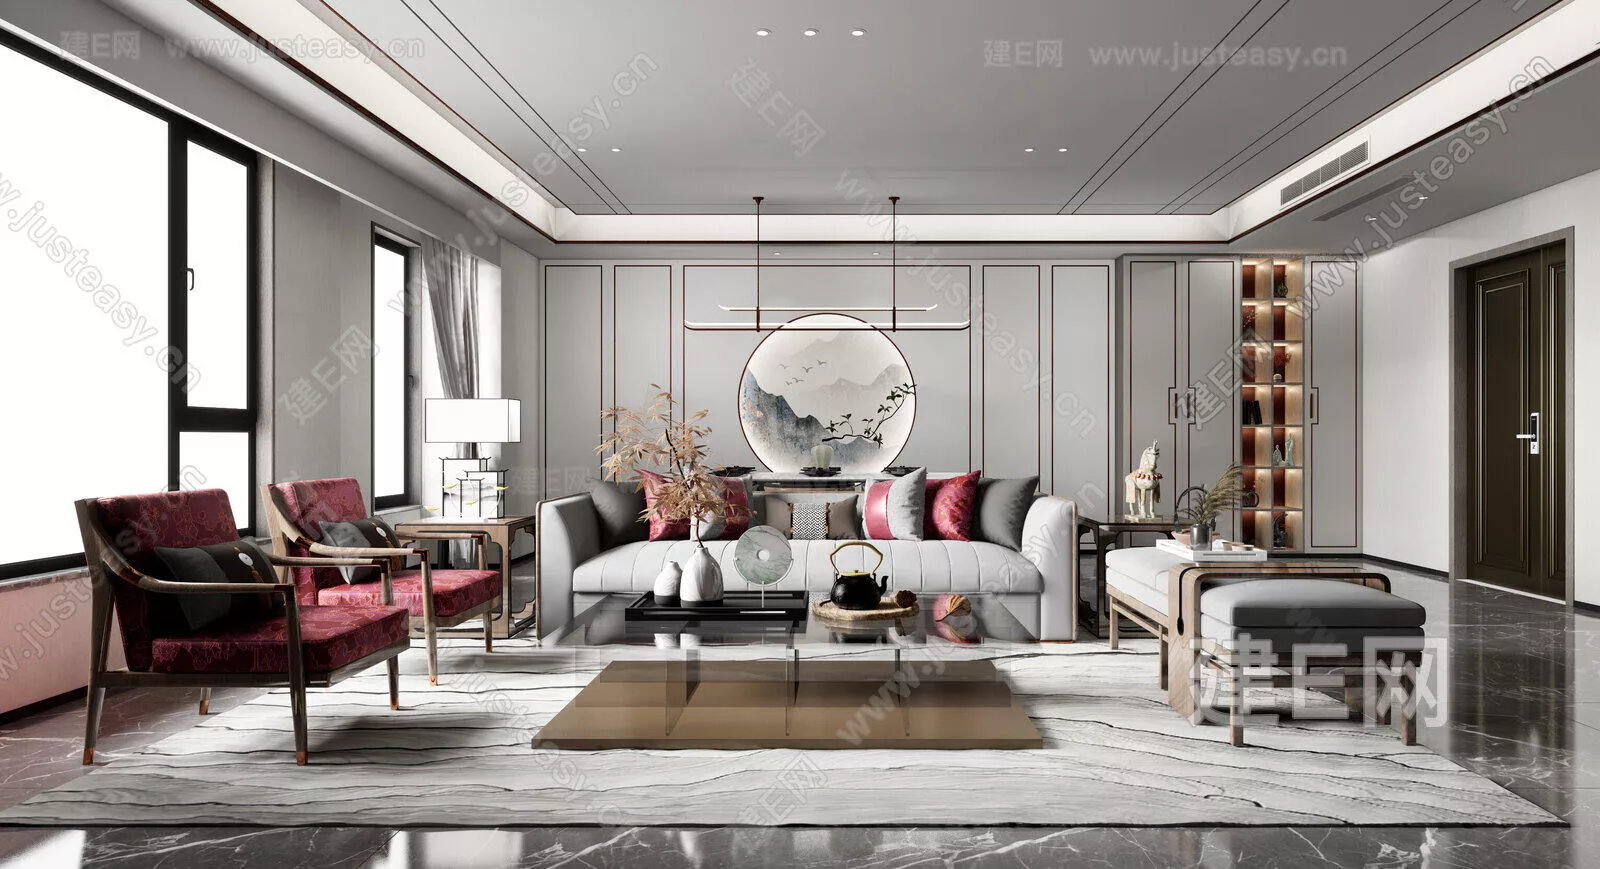 CHINESE LIVING ROOM - SKETCHUP 3D SCENE - ENSCAPE - 111036190